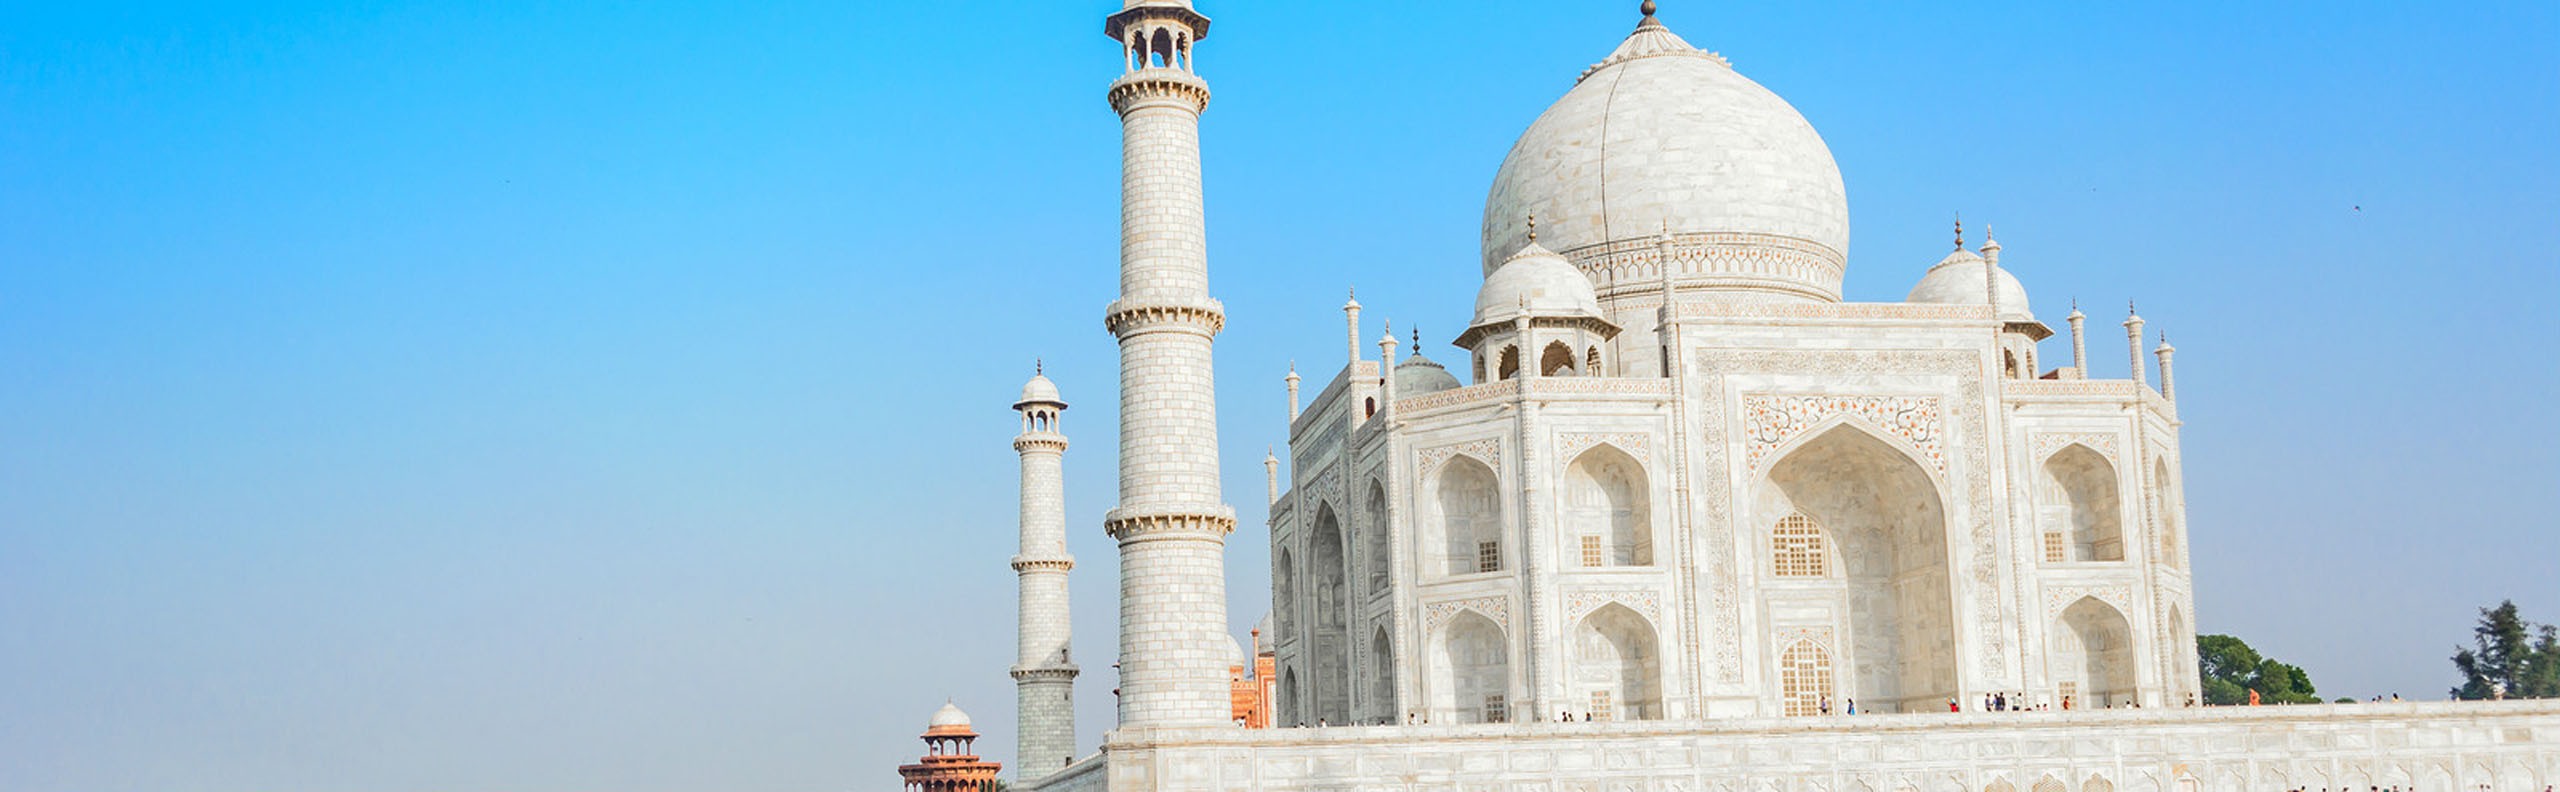 15 Interesting Facts about the Taj Mahal